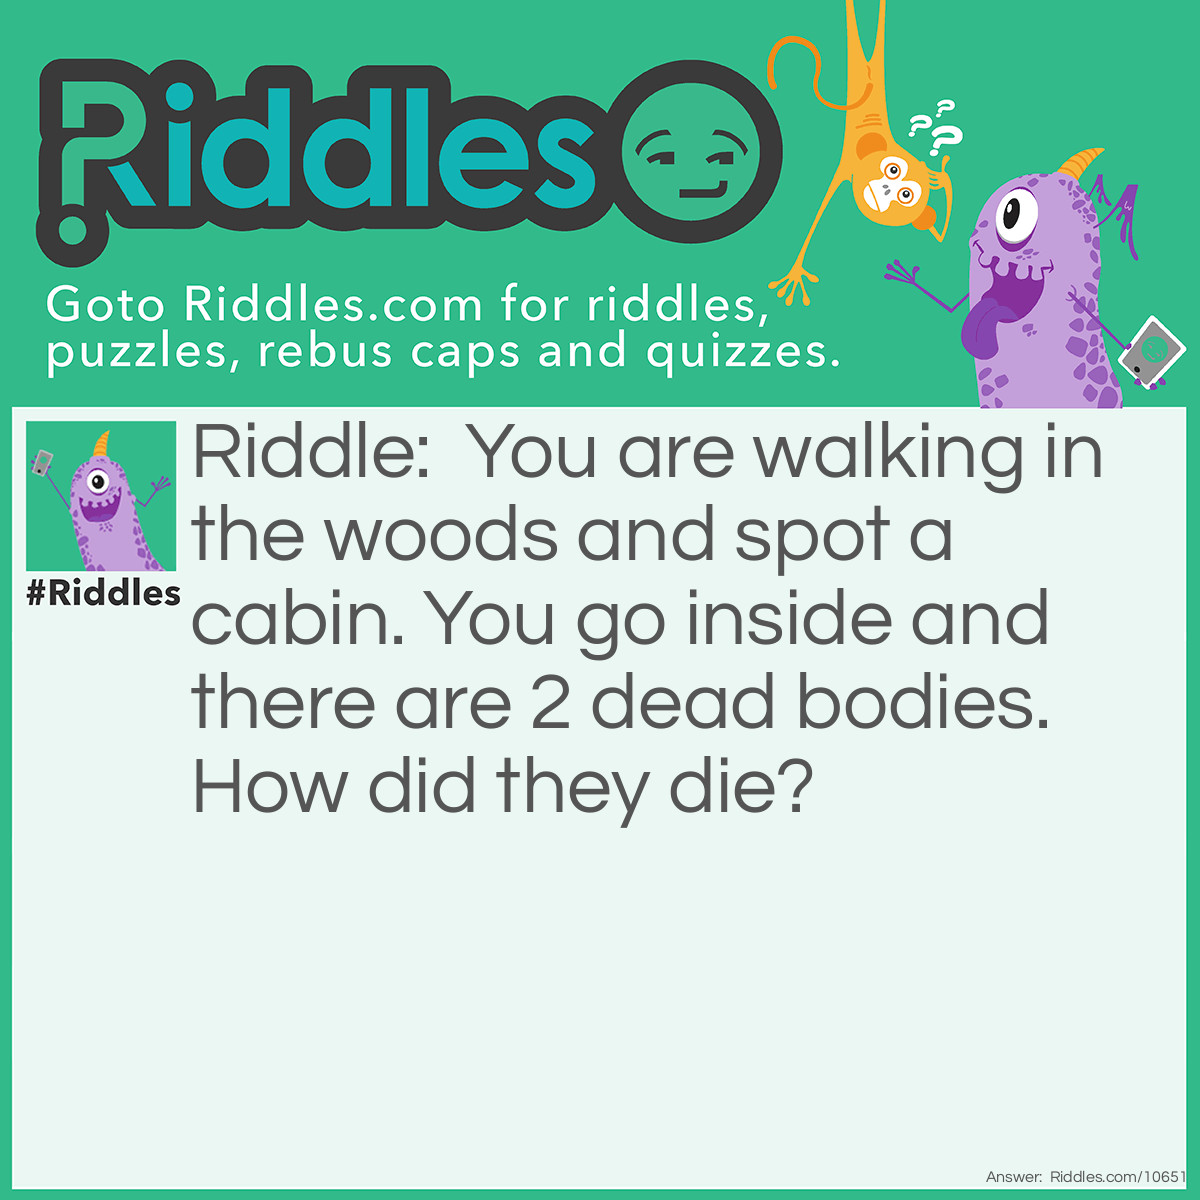 Riddle: You are walking in the woods and spot a cabin. You go inside and there are 2 dead bodies. How did they die? Answer: It was the cabin of a plane that crashed.